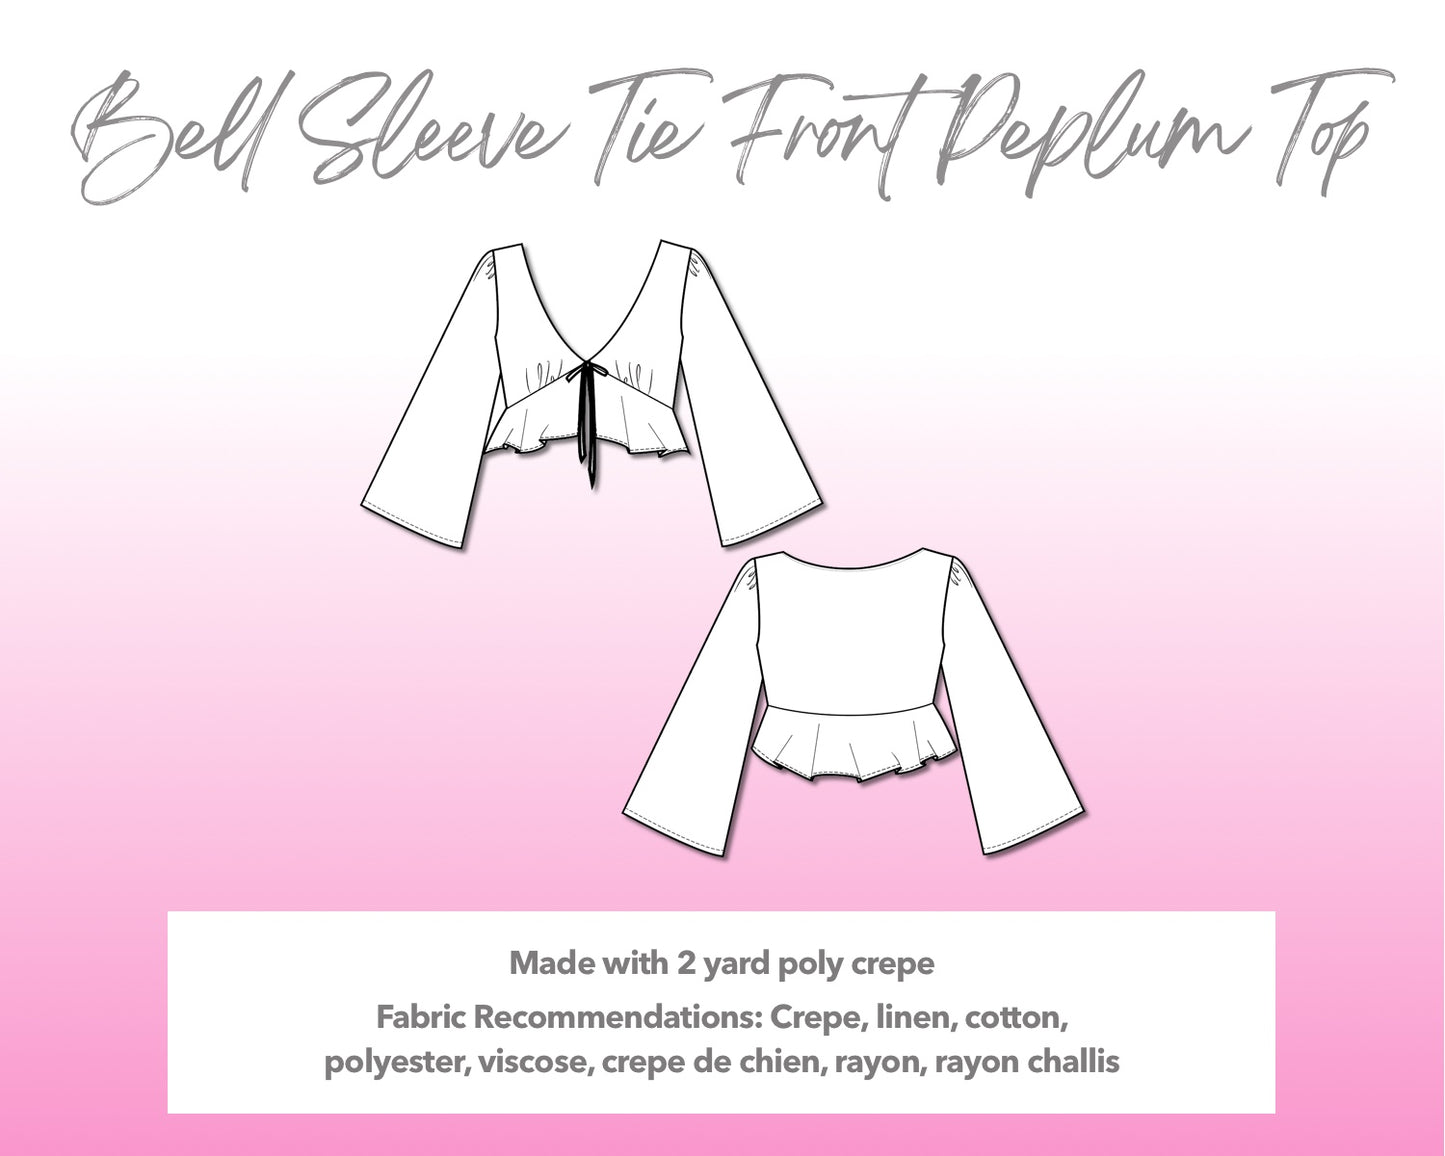 Illustration and detailed description for Bell Sleeve Tie Front Peplum Top  sewing pattern.